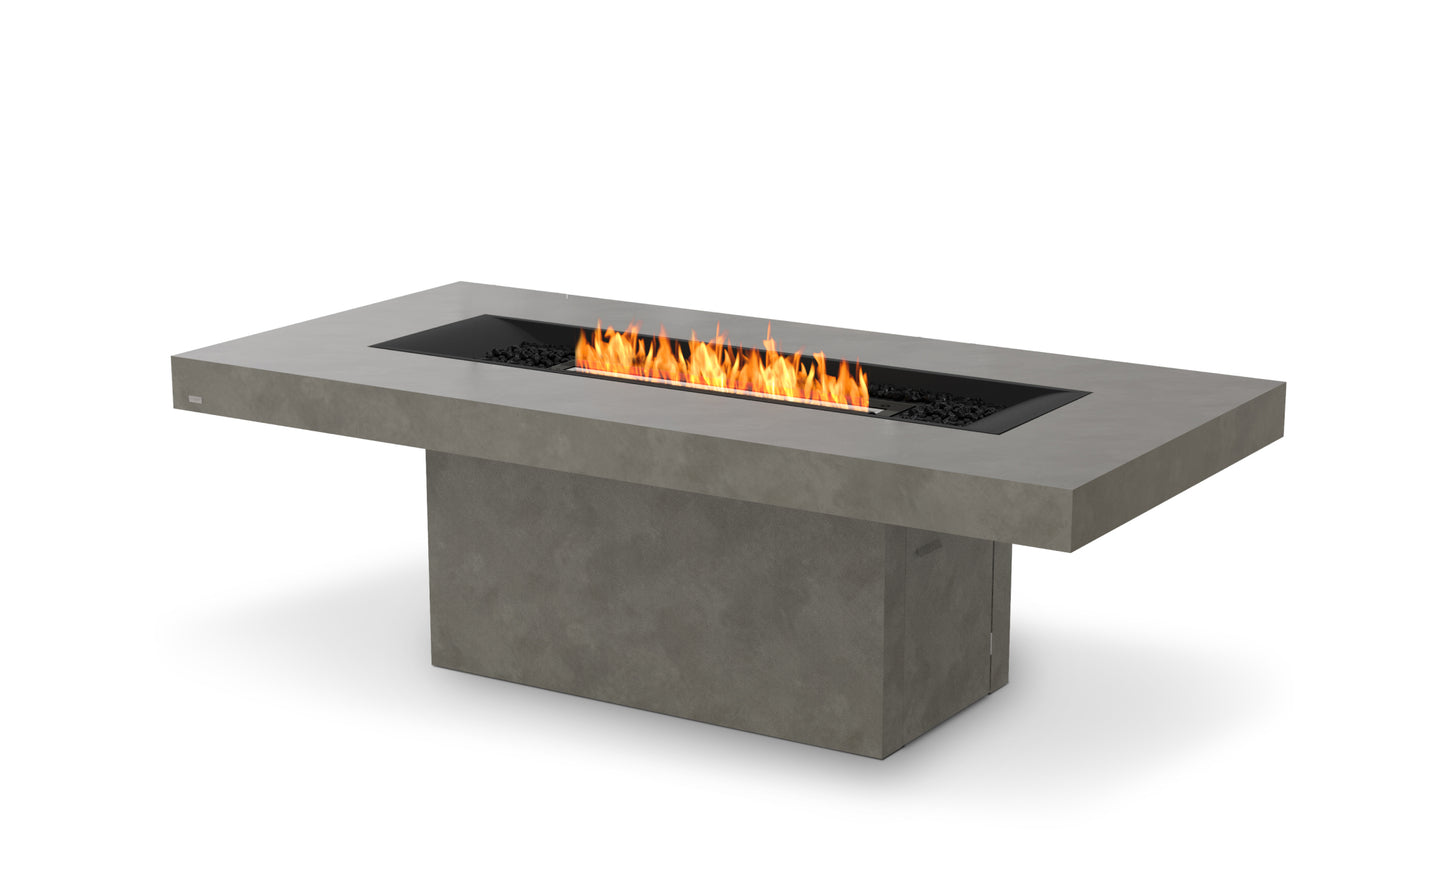 EcoSmart Fire Gin (Dining) Fire Pit Table with Bioethanol Sustainable Fuel - PadioLiving - EcoSmart Fire Gin (Dining) Fire Pit Table with Bioethanol Sustainable Fuel - Fire Pit - PadioLiving